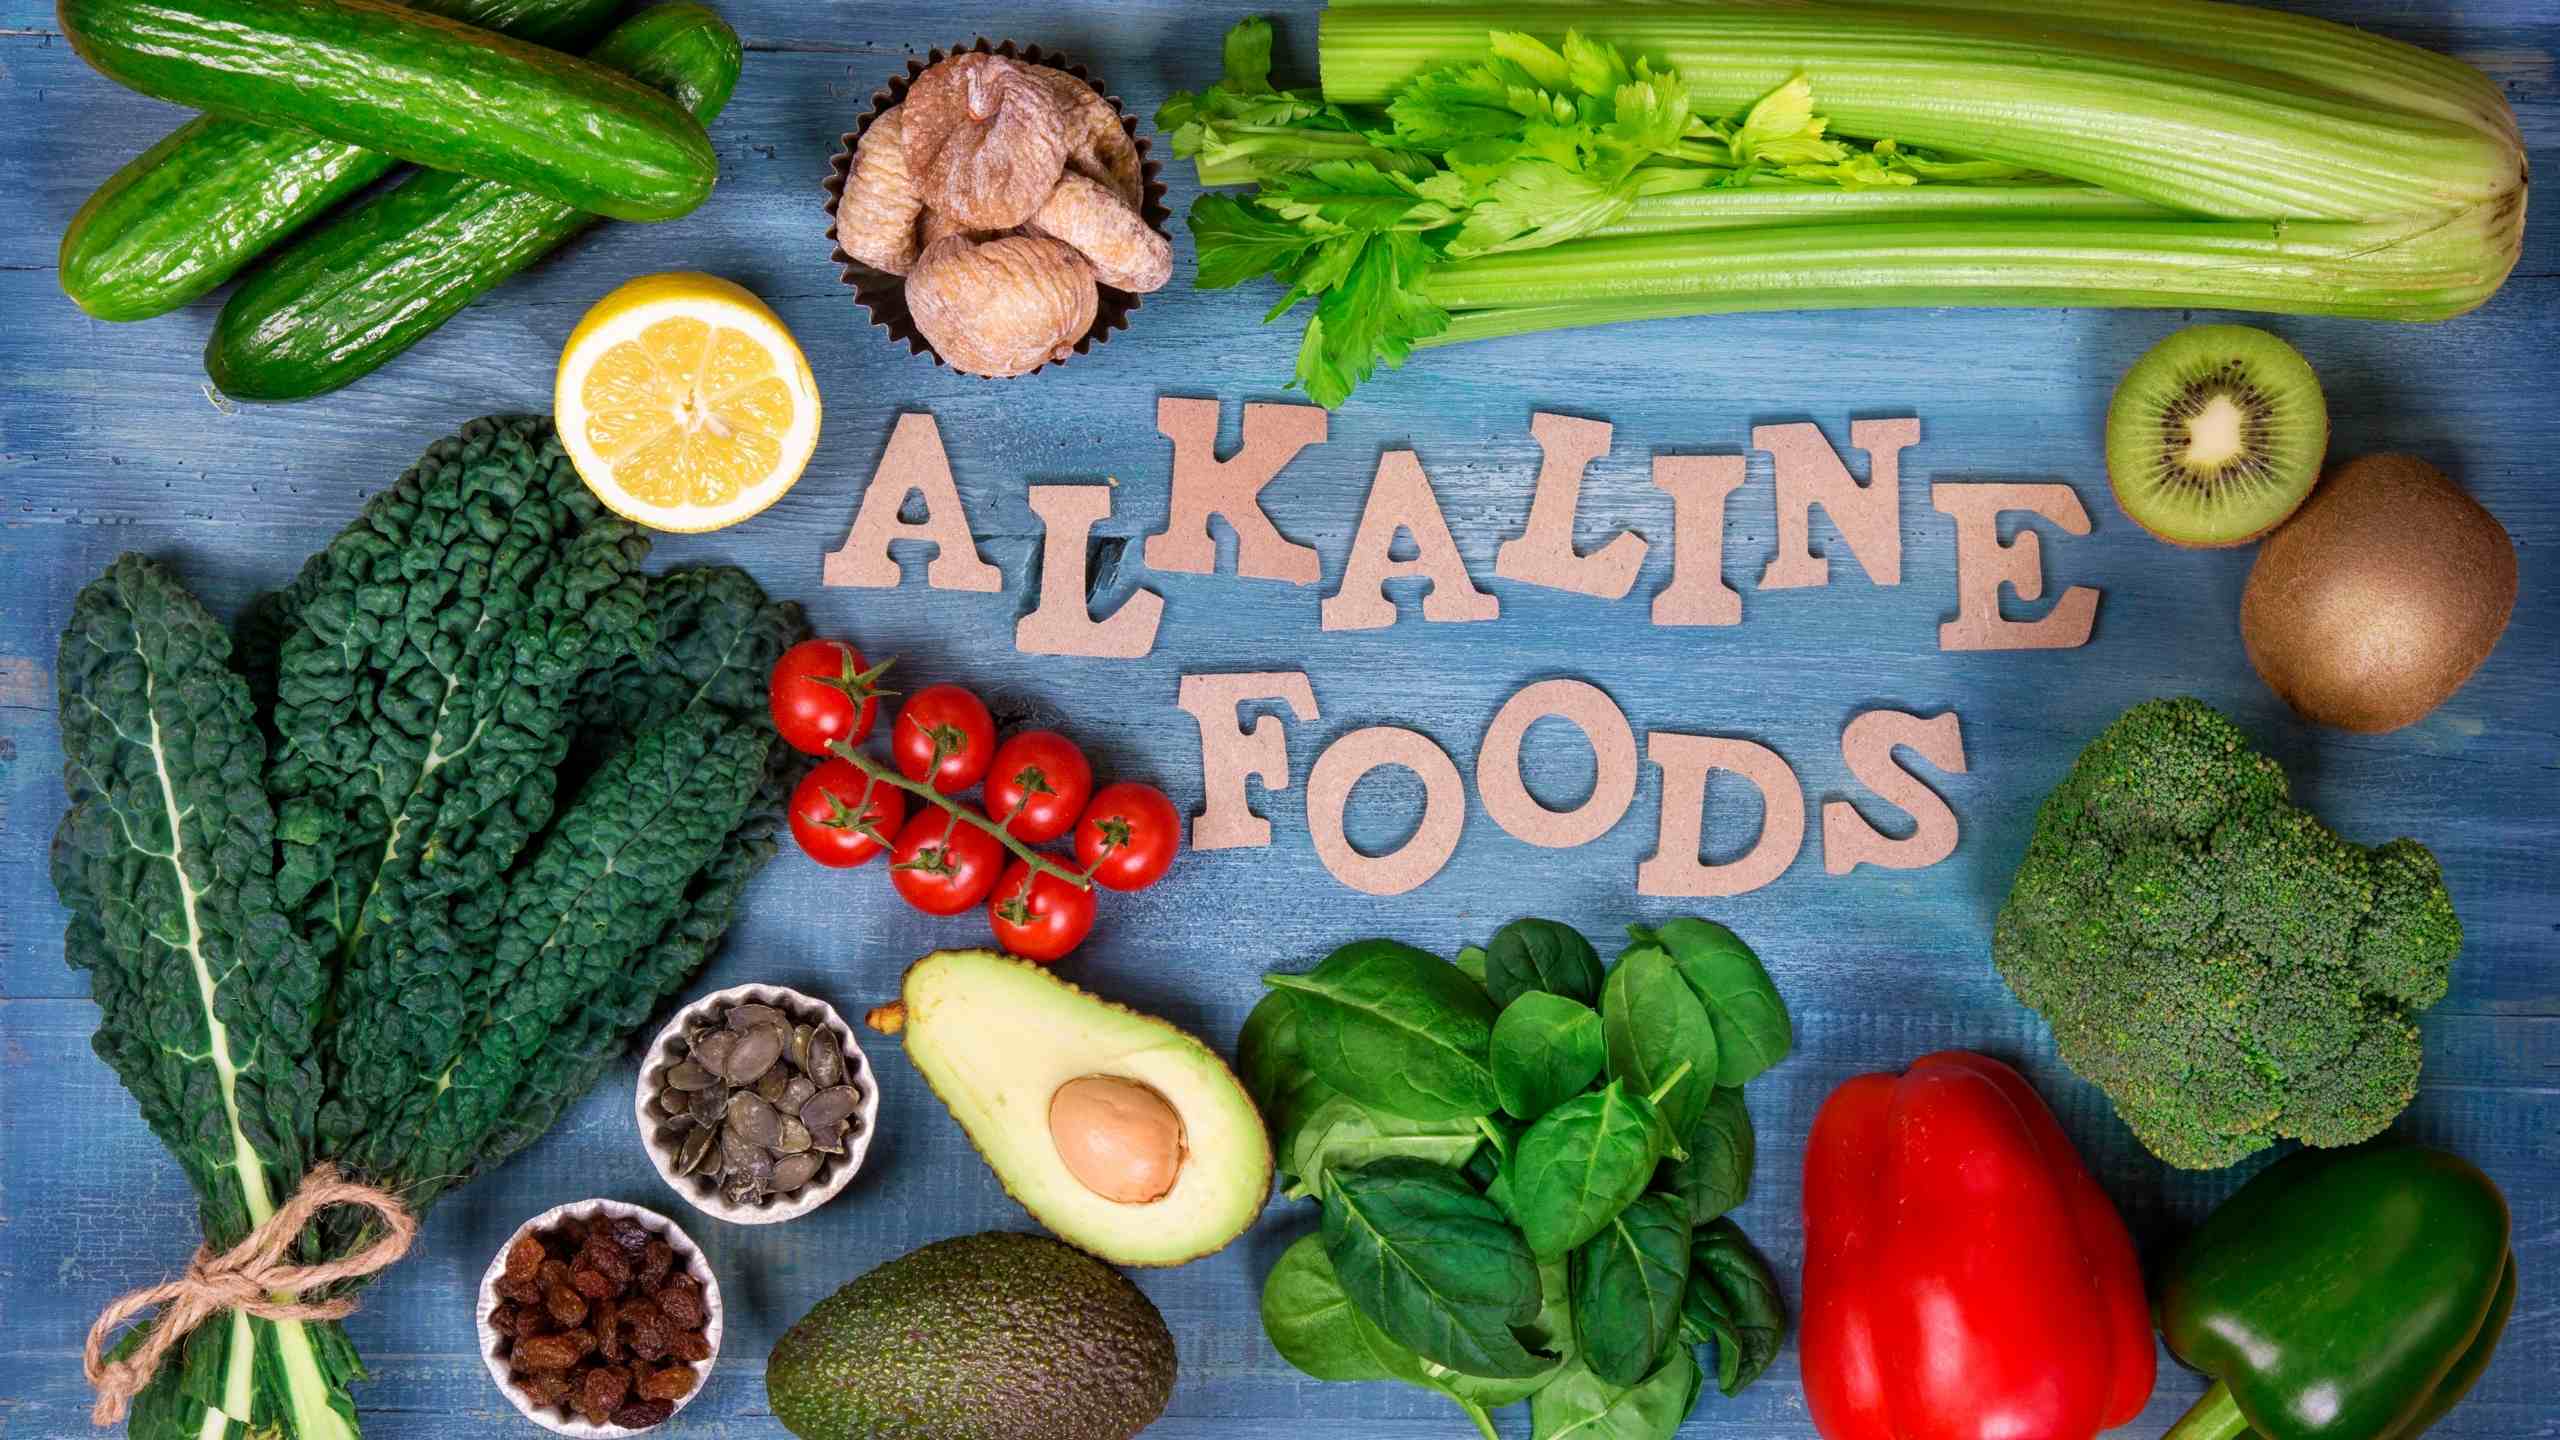 Alkaline Foods - 12 Alkaline Foods To Eat Frequently - Simple Health Facts